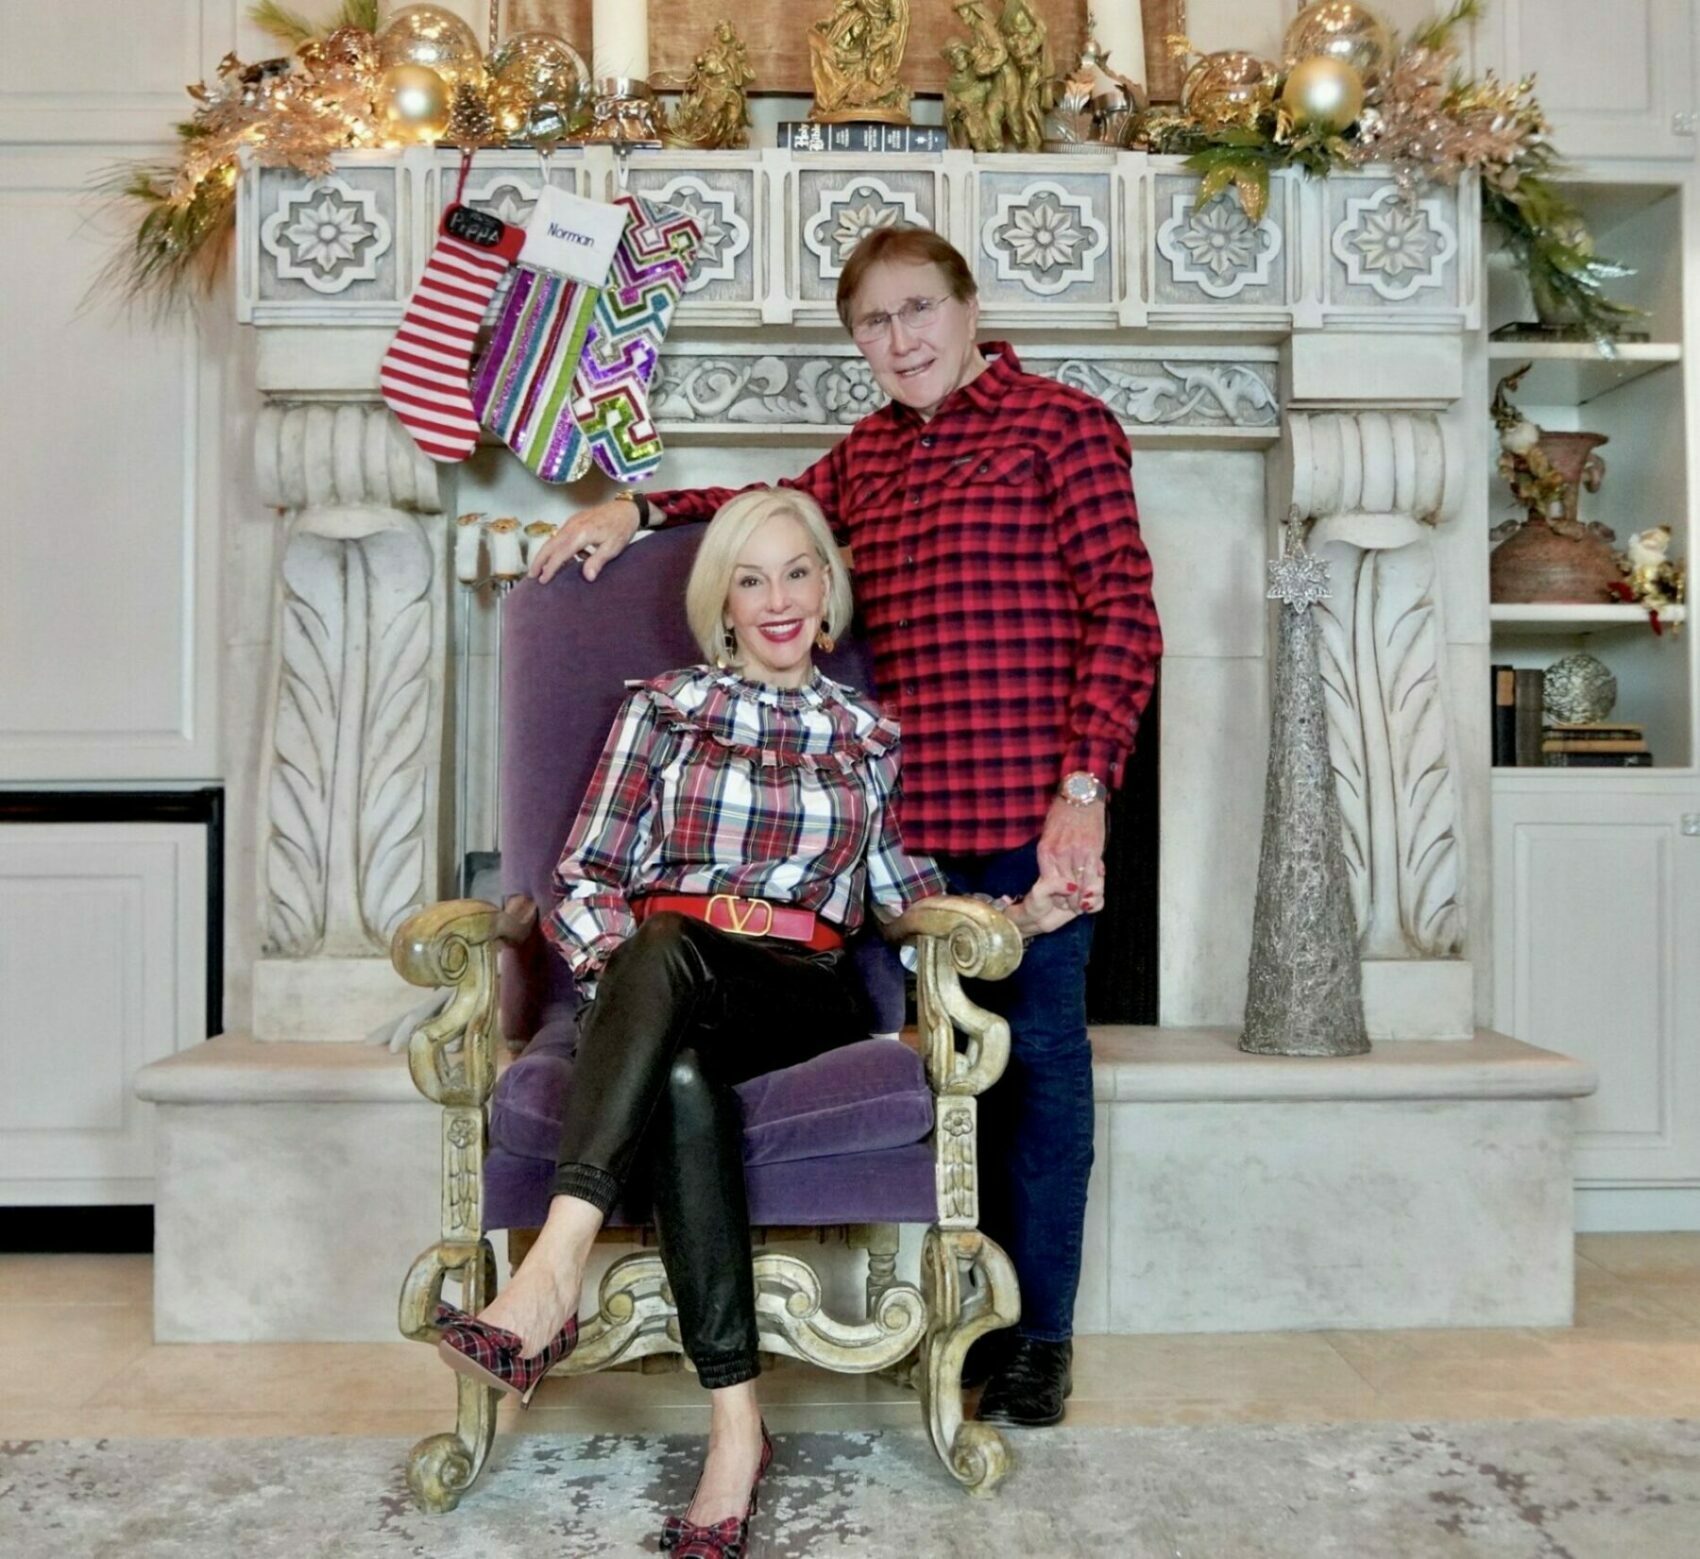 Sheree and Norman Frede in front of fireplace wearing holiday plaid